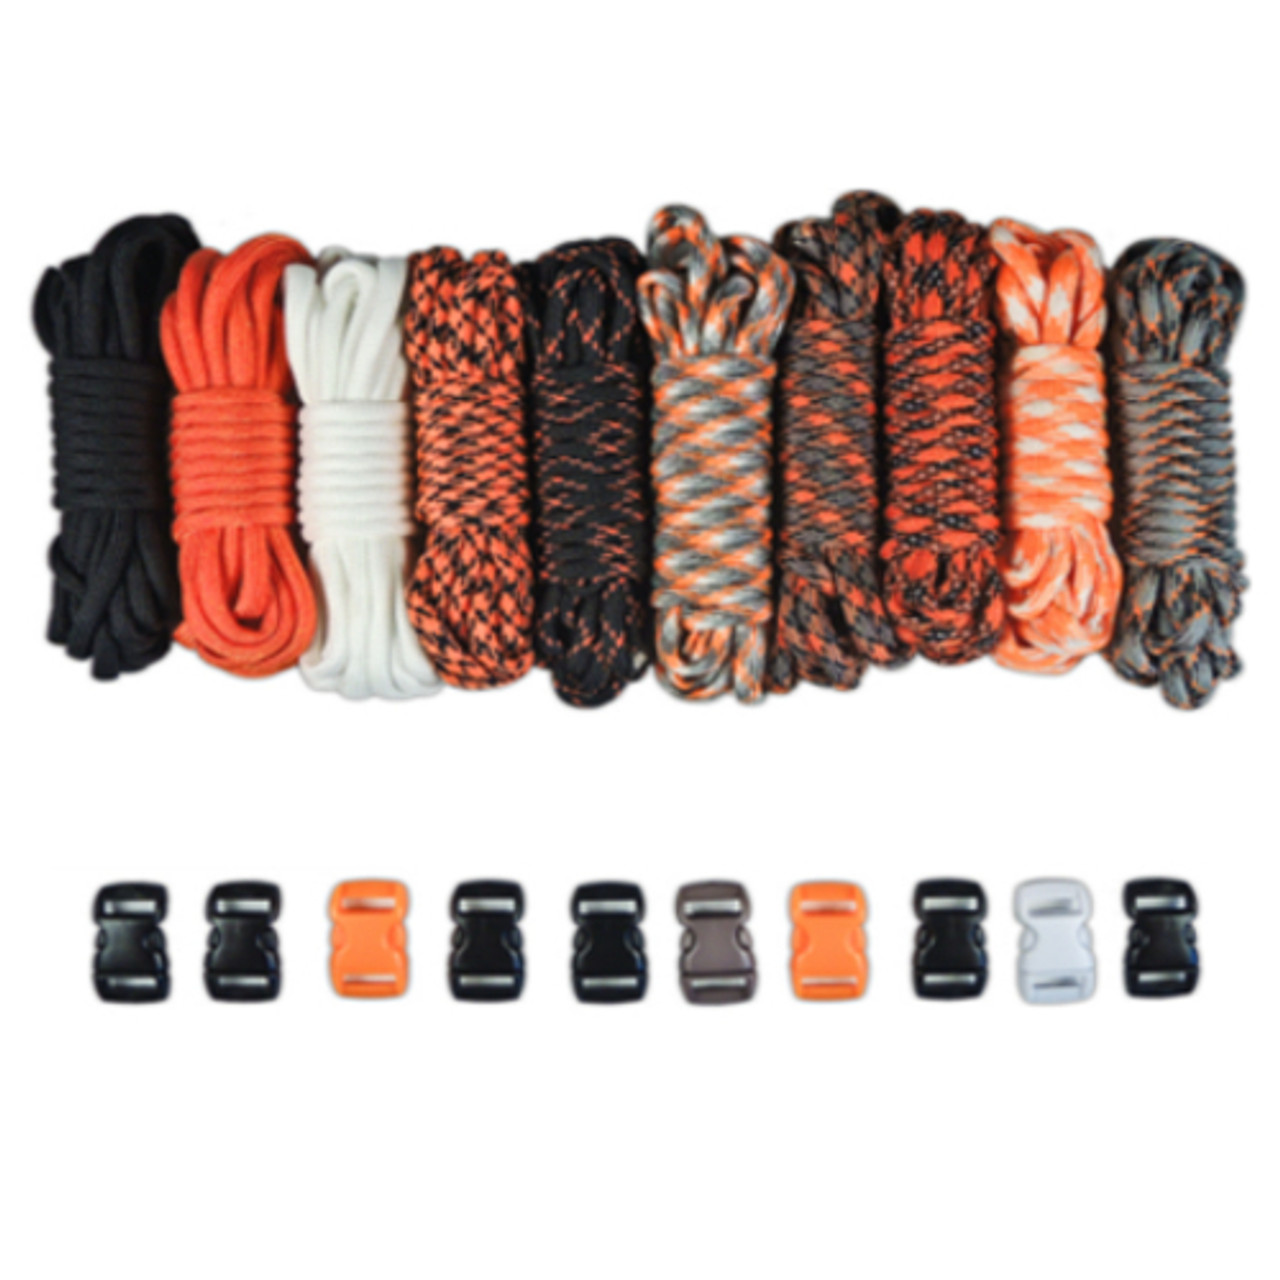 550 Paracord Combo Kit with Parachute Cord and Buckles by Paracord